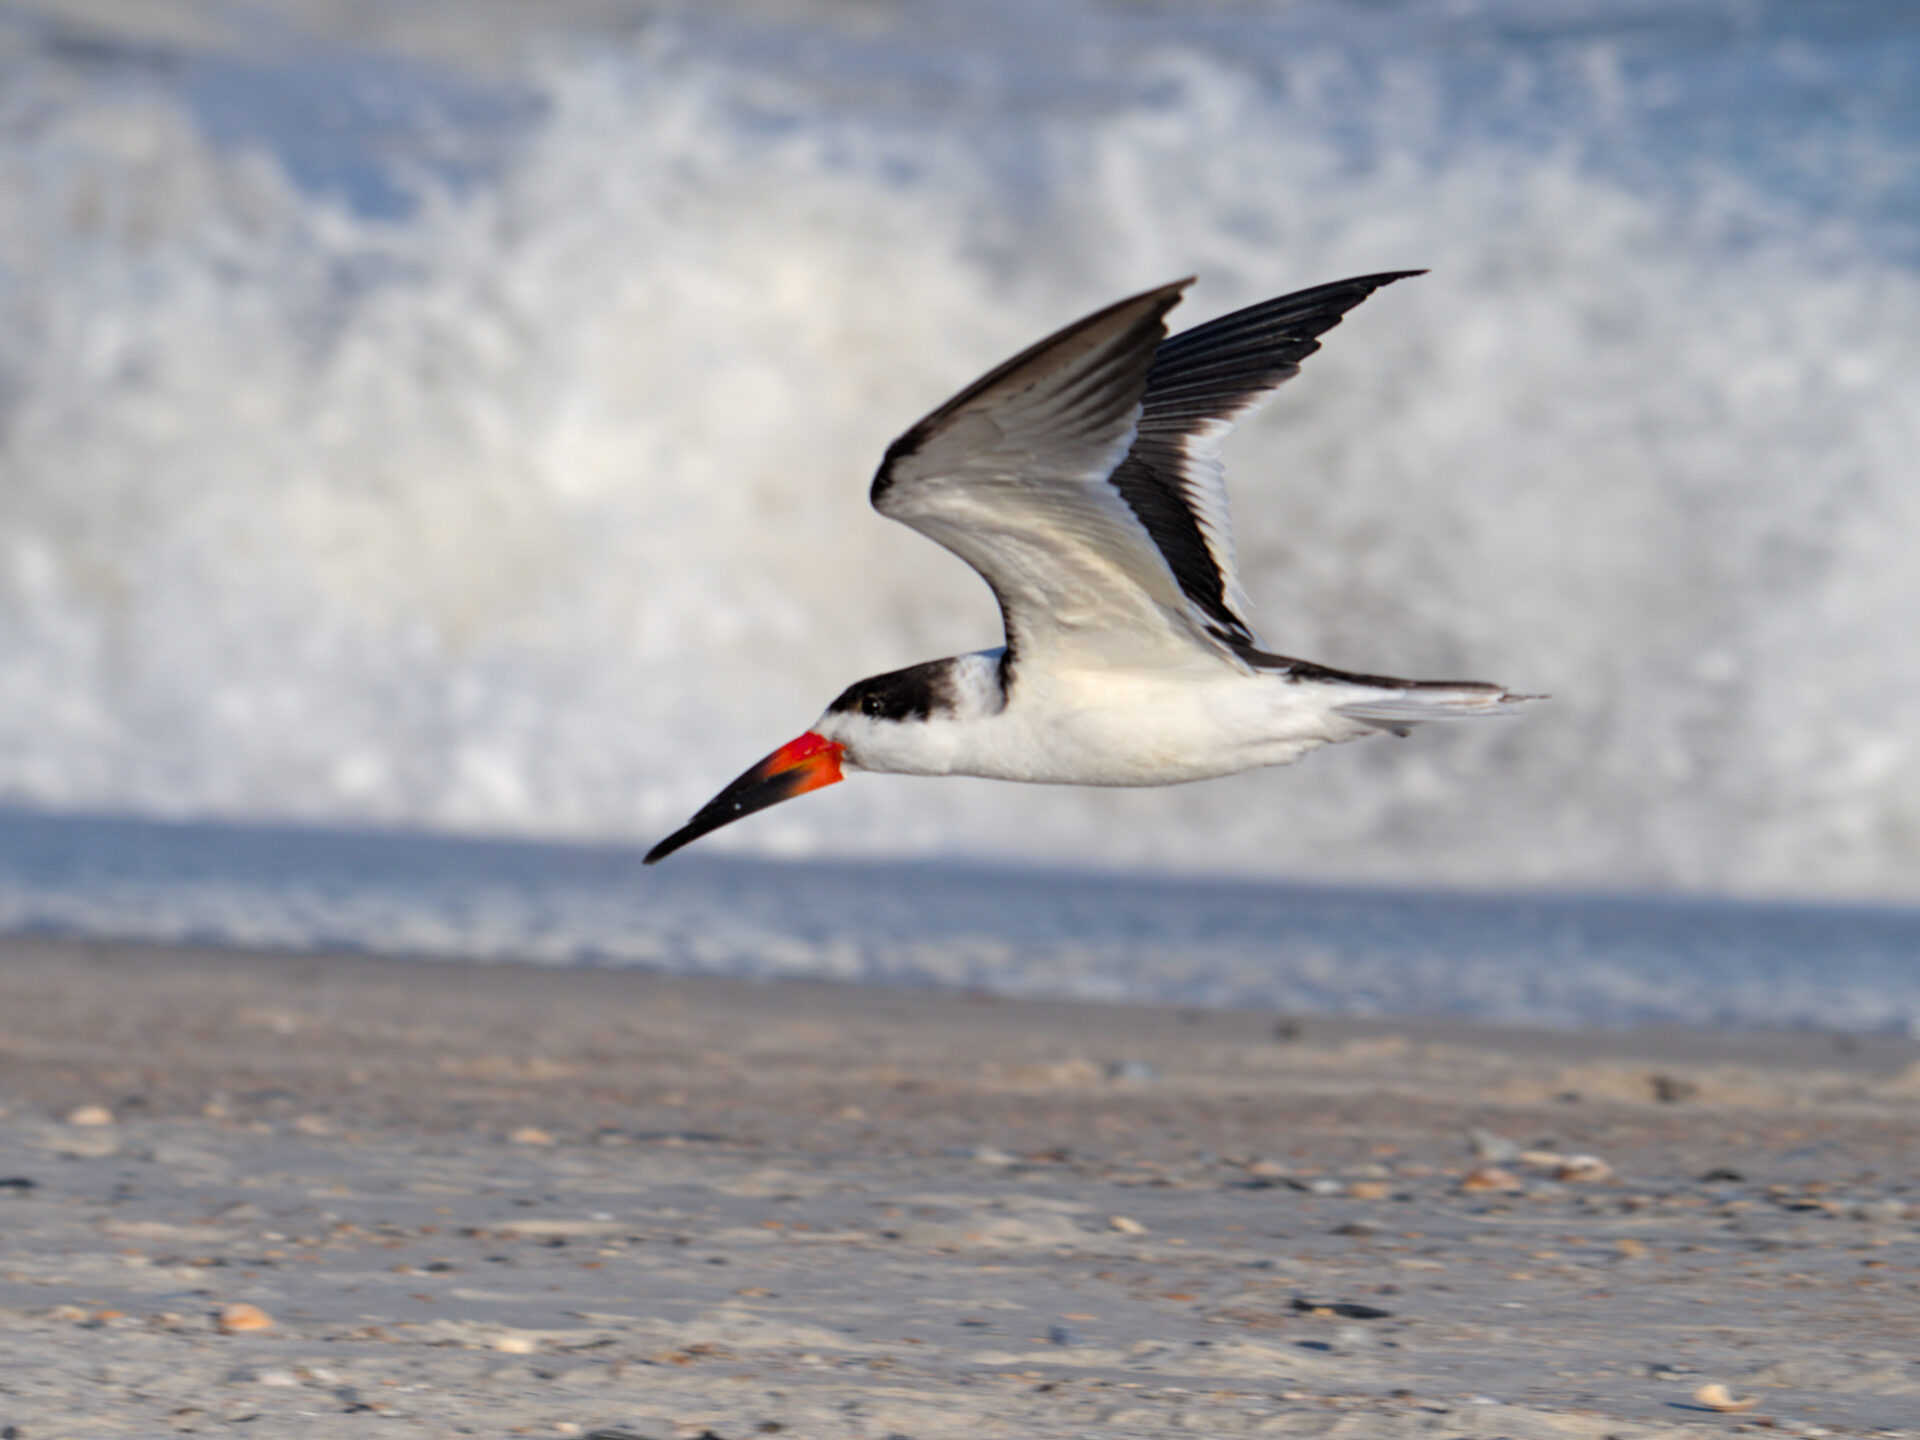 Black skimmer in flight over the beach, ocean and clouds in the background